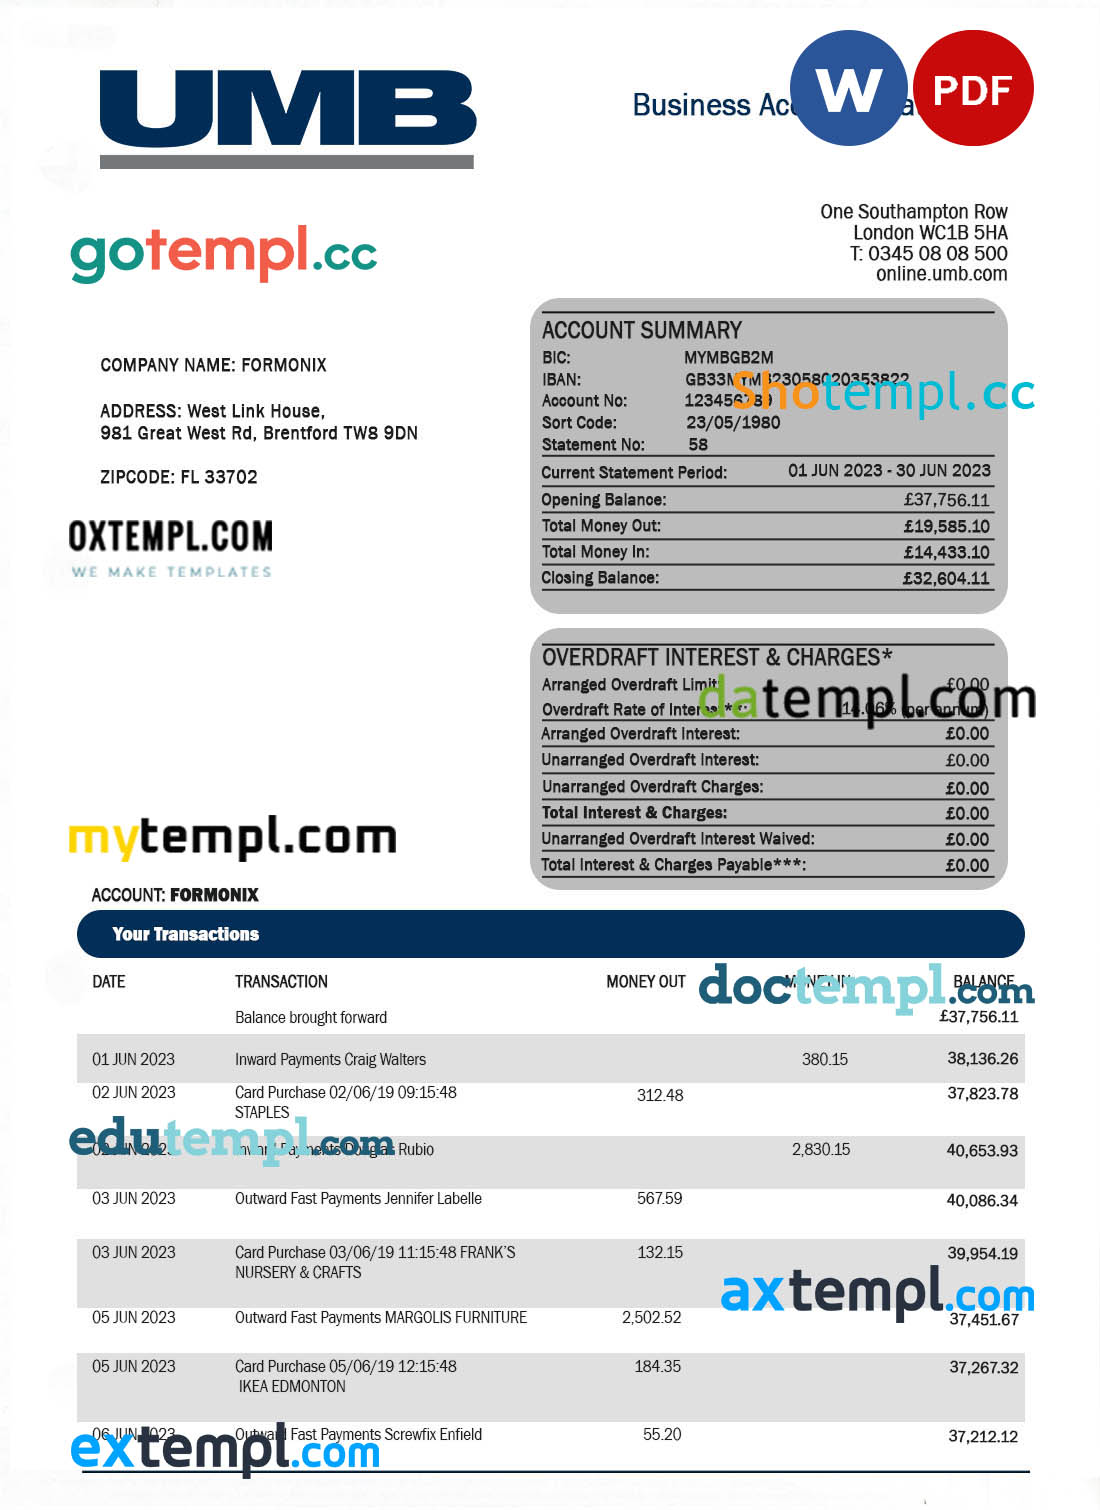 editable template, UMB Bank enterprise account statement Word and PDF template